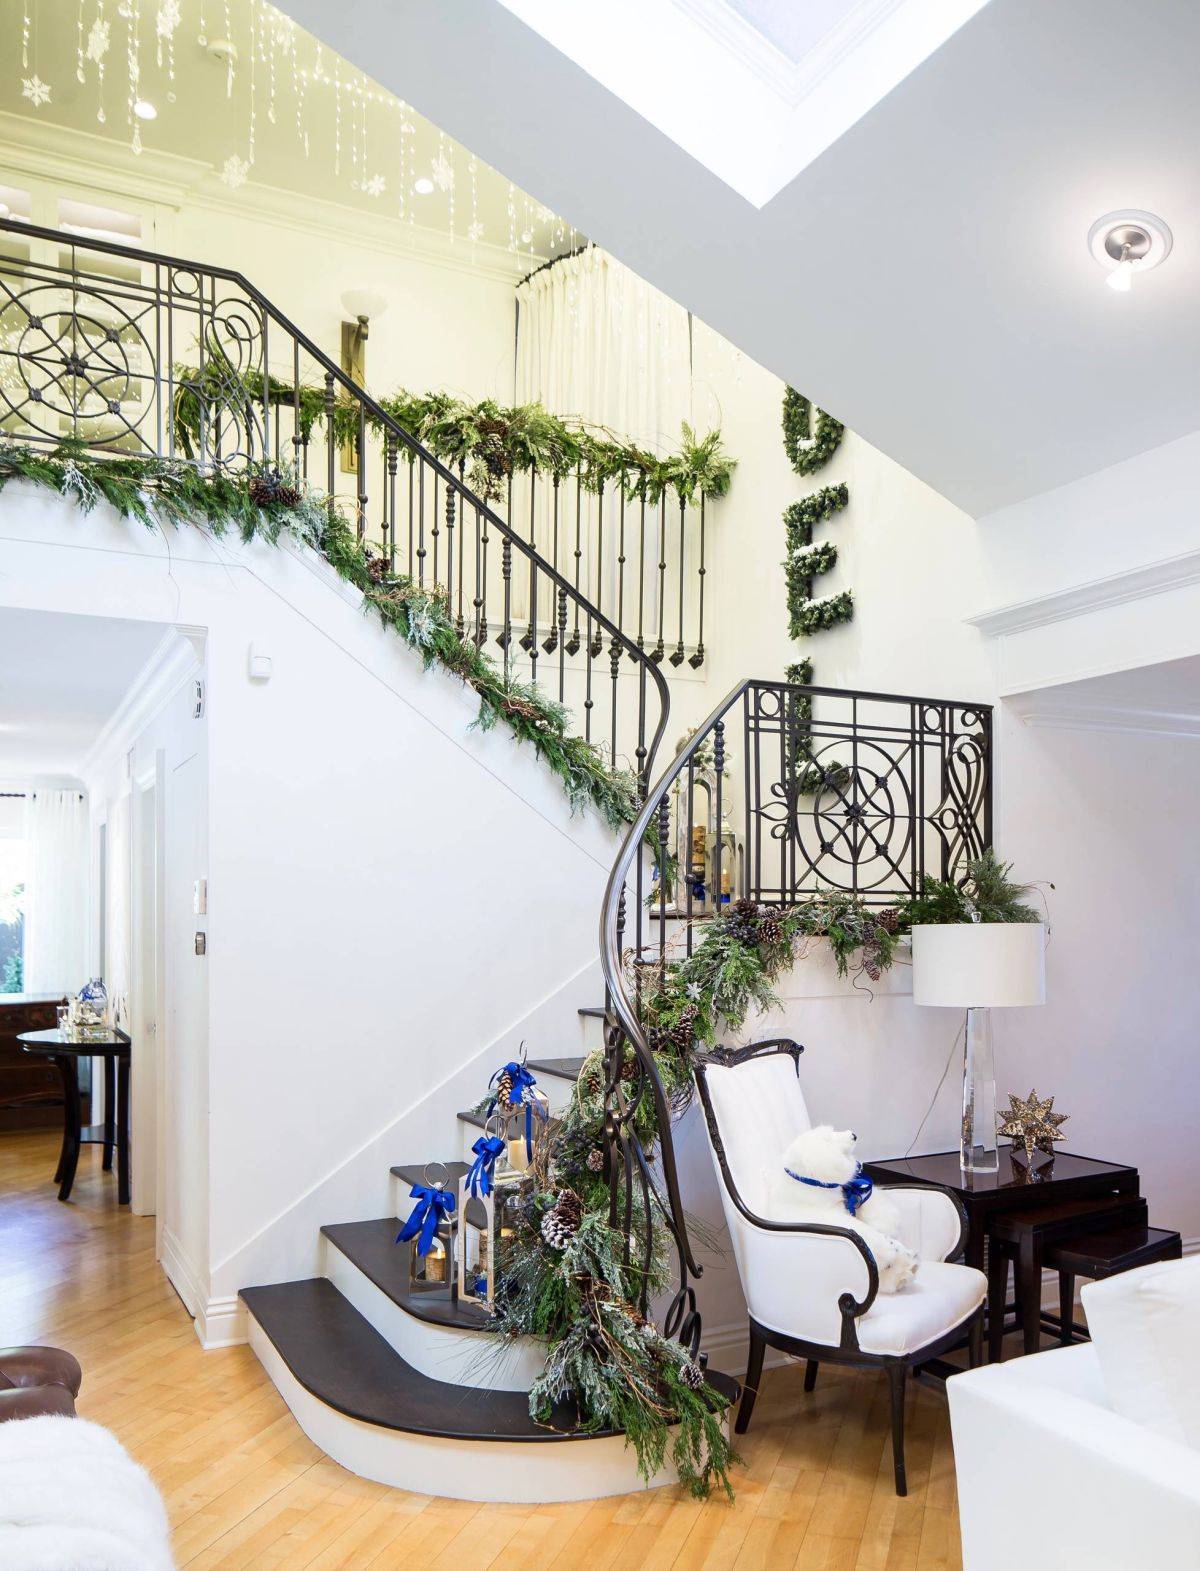 Touch-of-green-is-the-perfect-way-to-add-festive-cheer-to-this-entry-with-staircase-11533